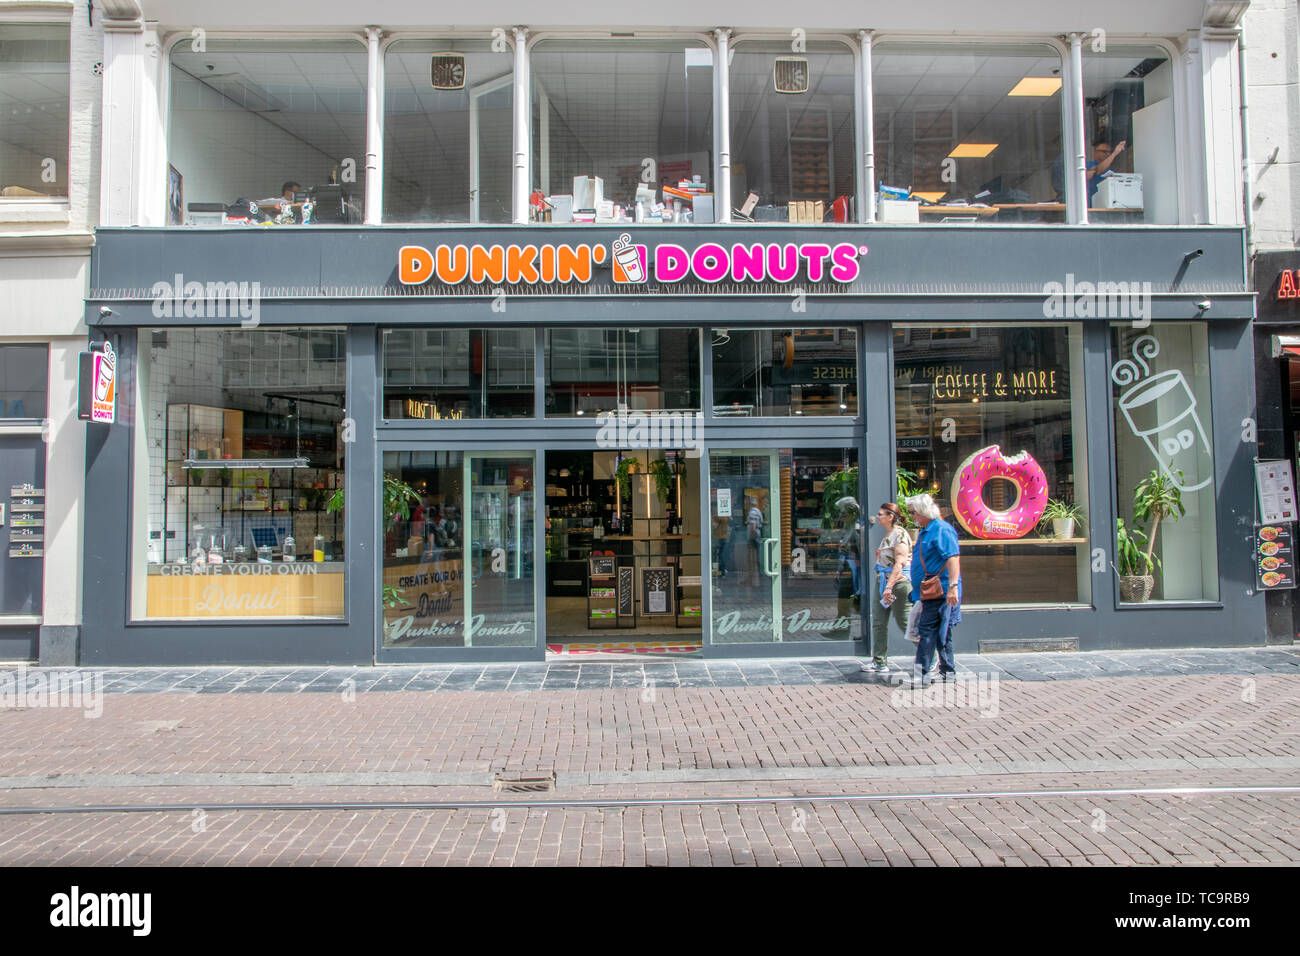 Dunkin' Donuts At The Reguliersbreestaat At Amsterdam The Netherlands 2019 Stock Photo